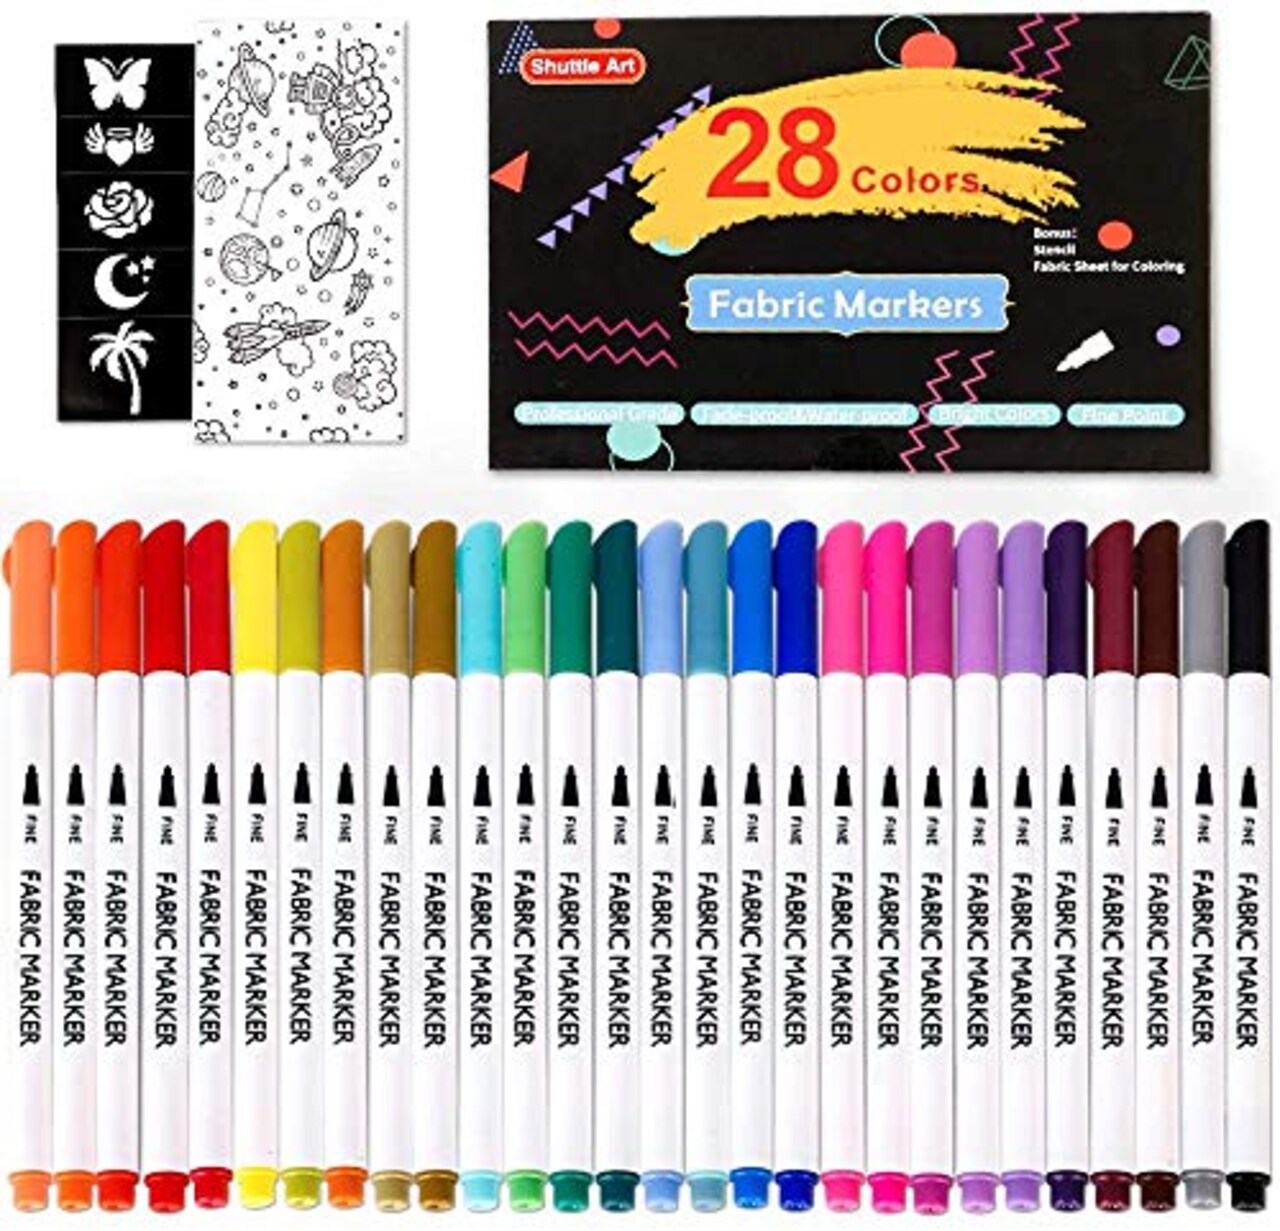 Shuttle Art 28 Colors Fabric Markers, Fabric Markers Permanent Markers for  T-Shirts Clothes Sneakers Jeans with 11 Stencils 1 Fabric Sheet,Permanent  Fabric Pens for Kids Adult Painting Writing…